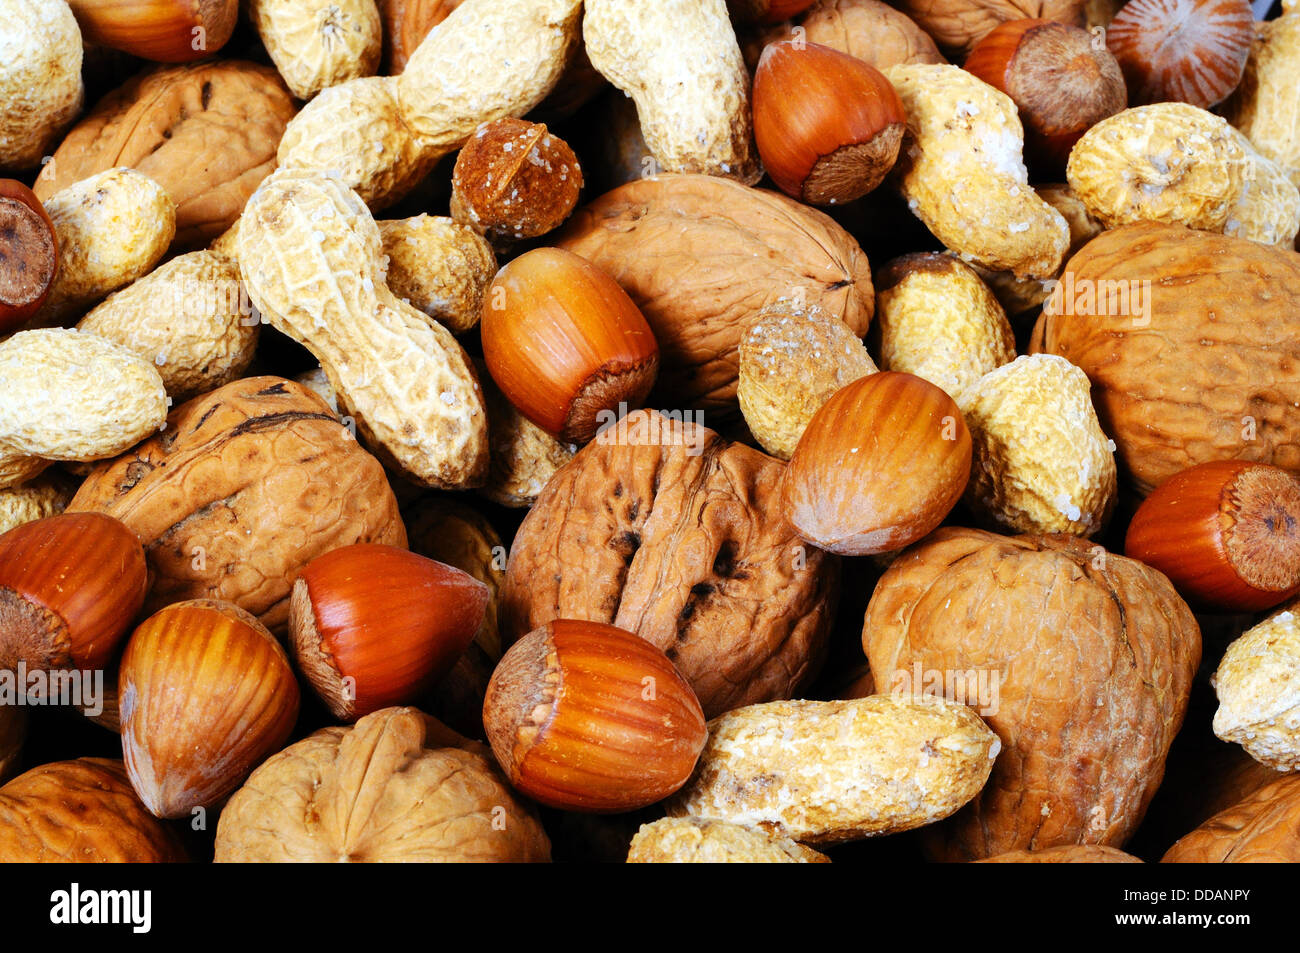 Mixed nuts in their shells (Monkey nuts, Walnuts and Hazelnuts). Stock Photo